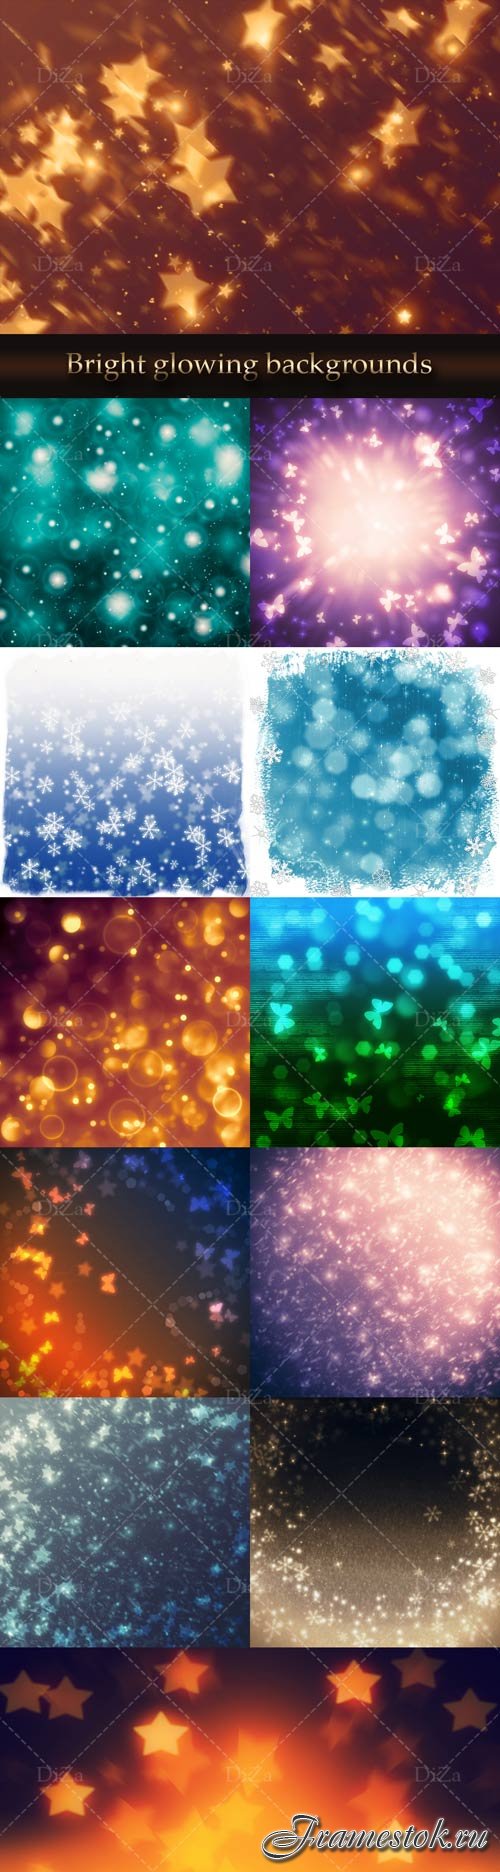 Bright glowing backgrounds